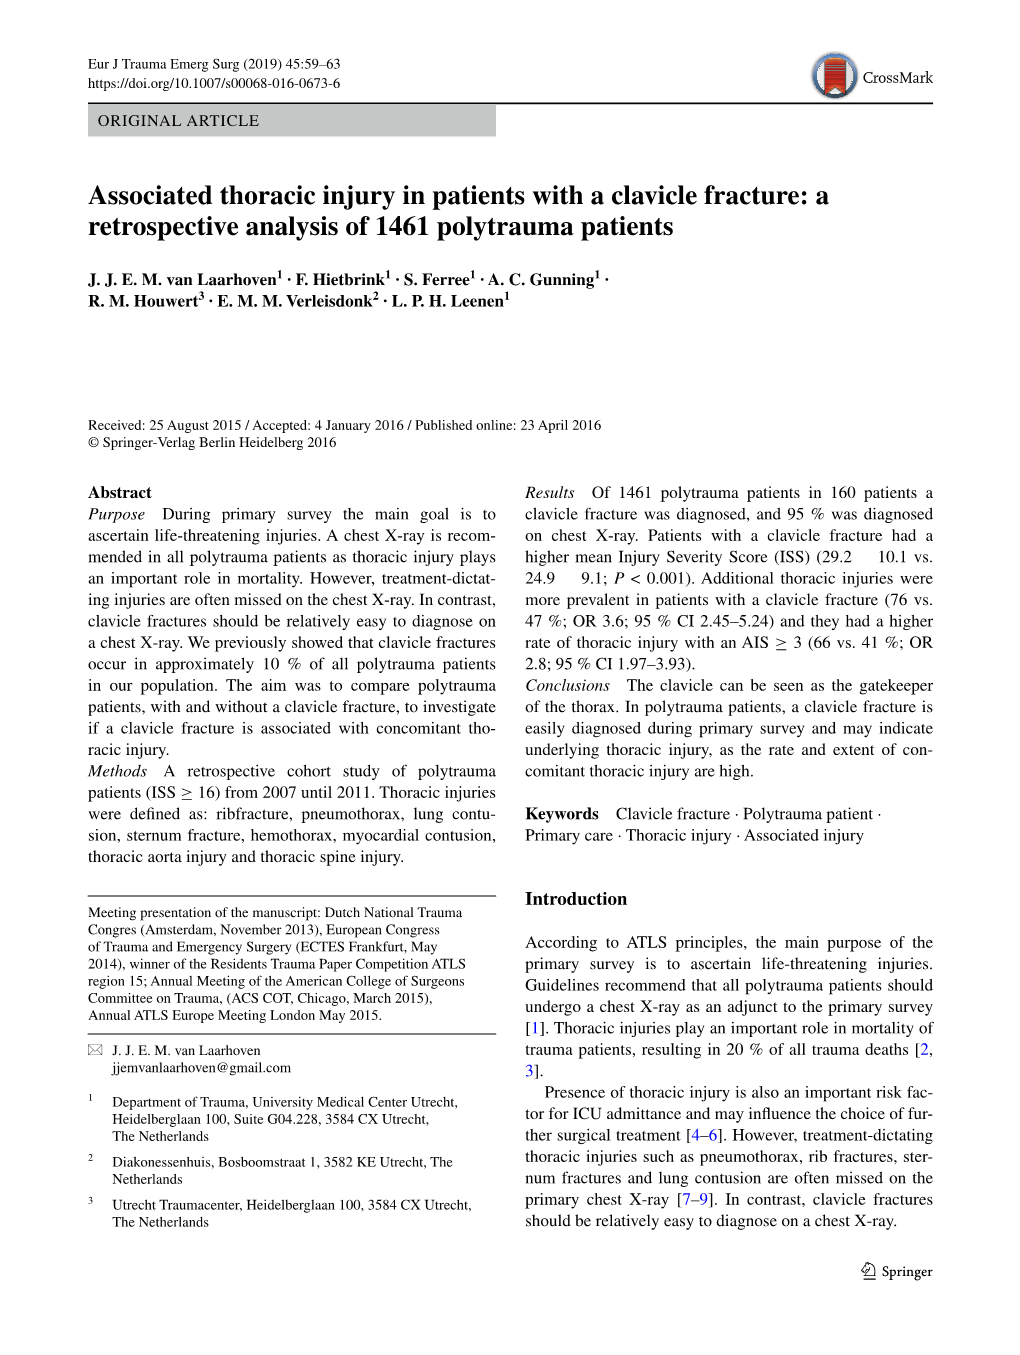 Associated Thoracic Injury in Patients with a Clavicle Fracture: a Retrospective Analysis of 1461 Polytrauma Patients